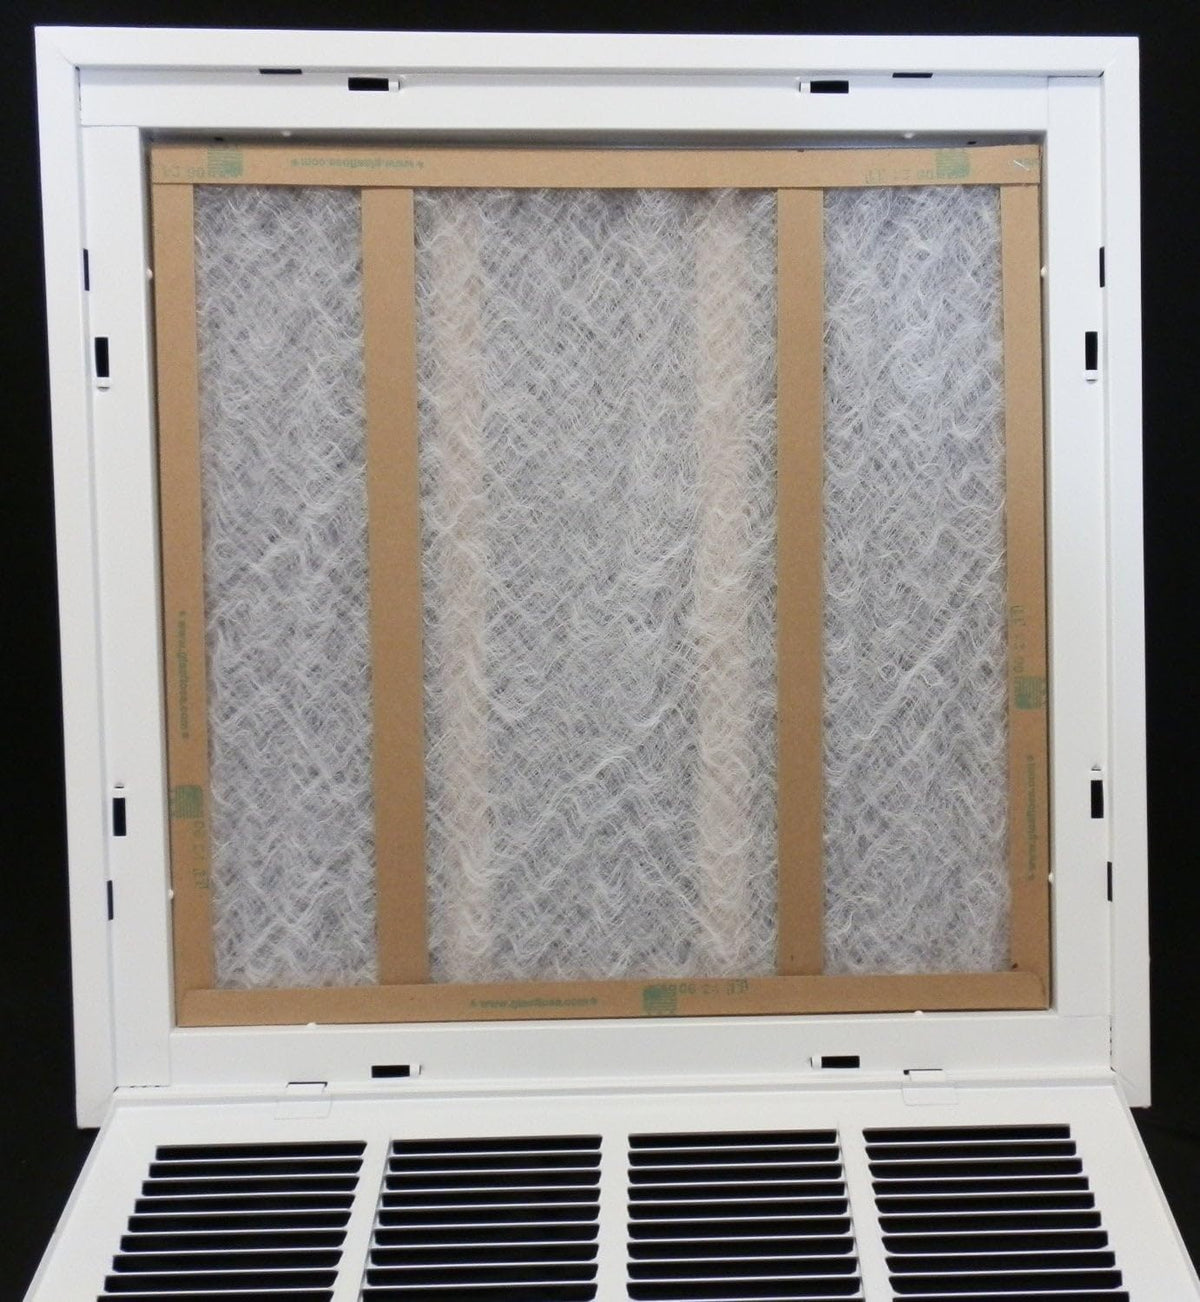 32&quot; X 24&quot; Steel Return Air Filter Grille for 1&quot; Filter - Removable Frame - [Outer Dimensions: 34 5/8&quot; X 26 5/8&quot;]